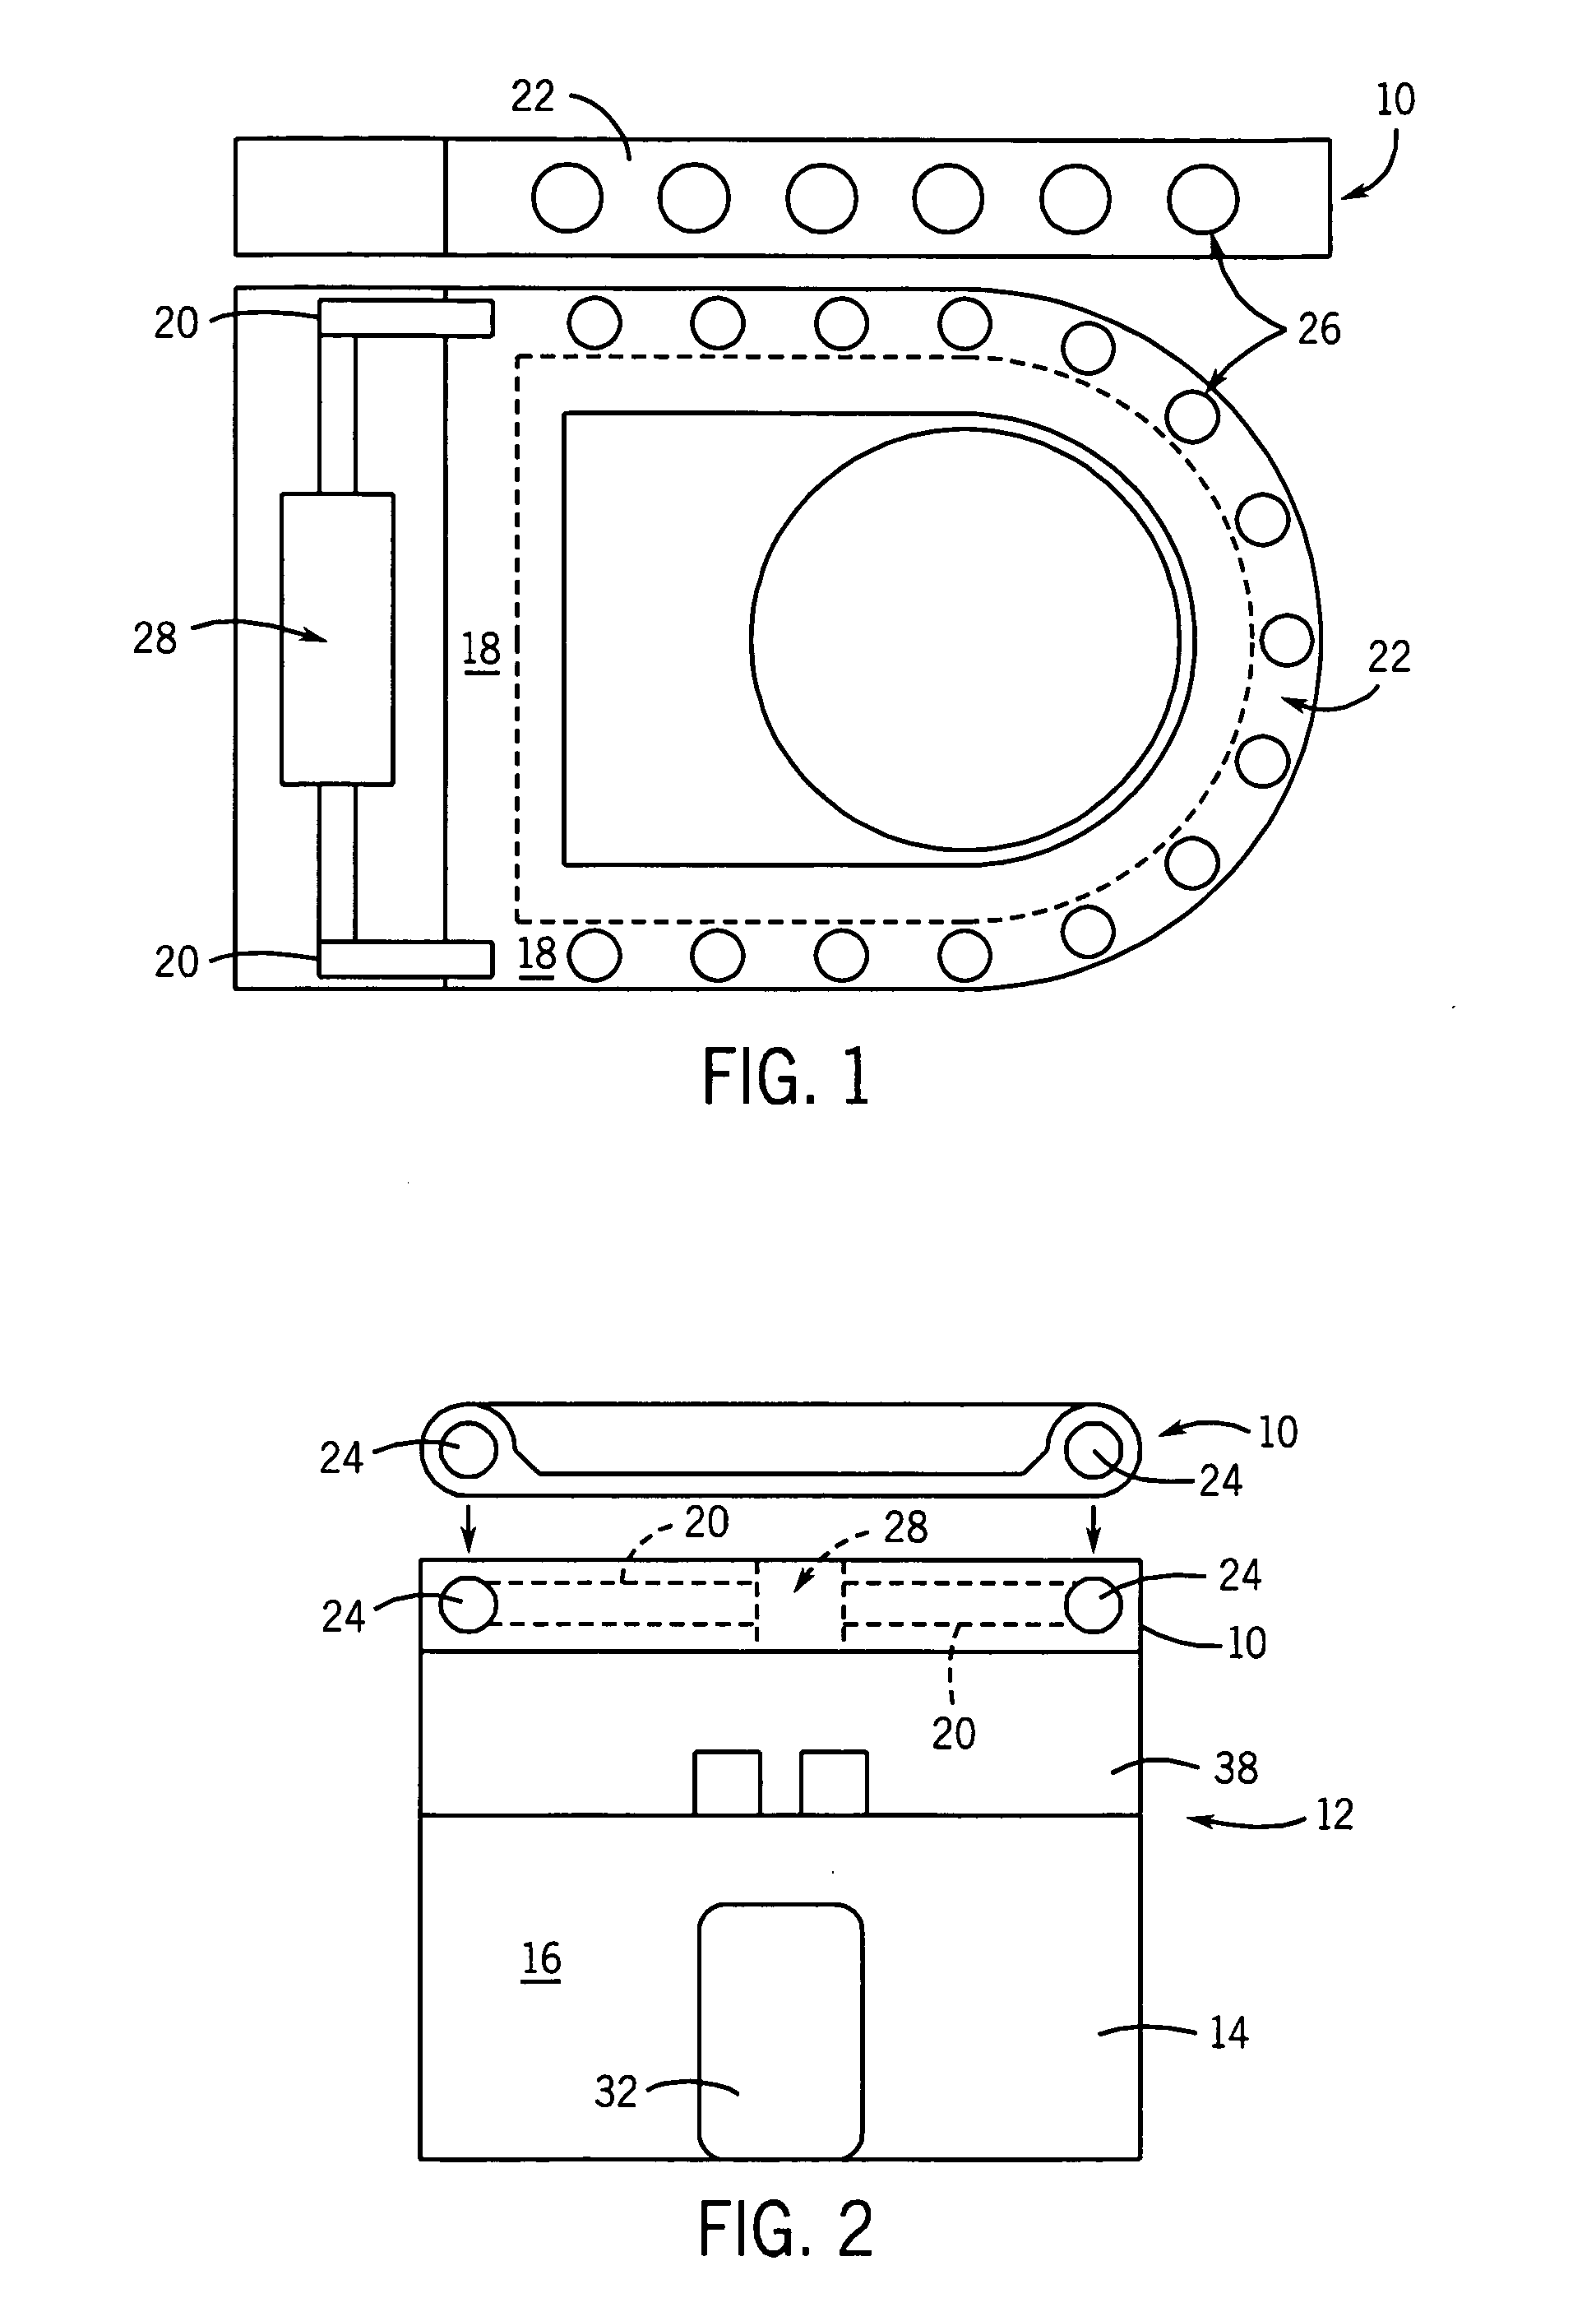 Insect-trapping condensing system